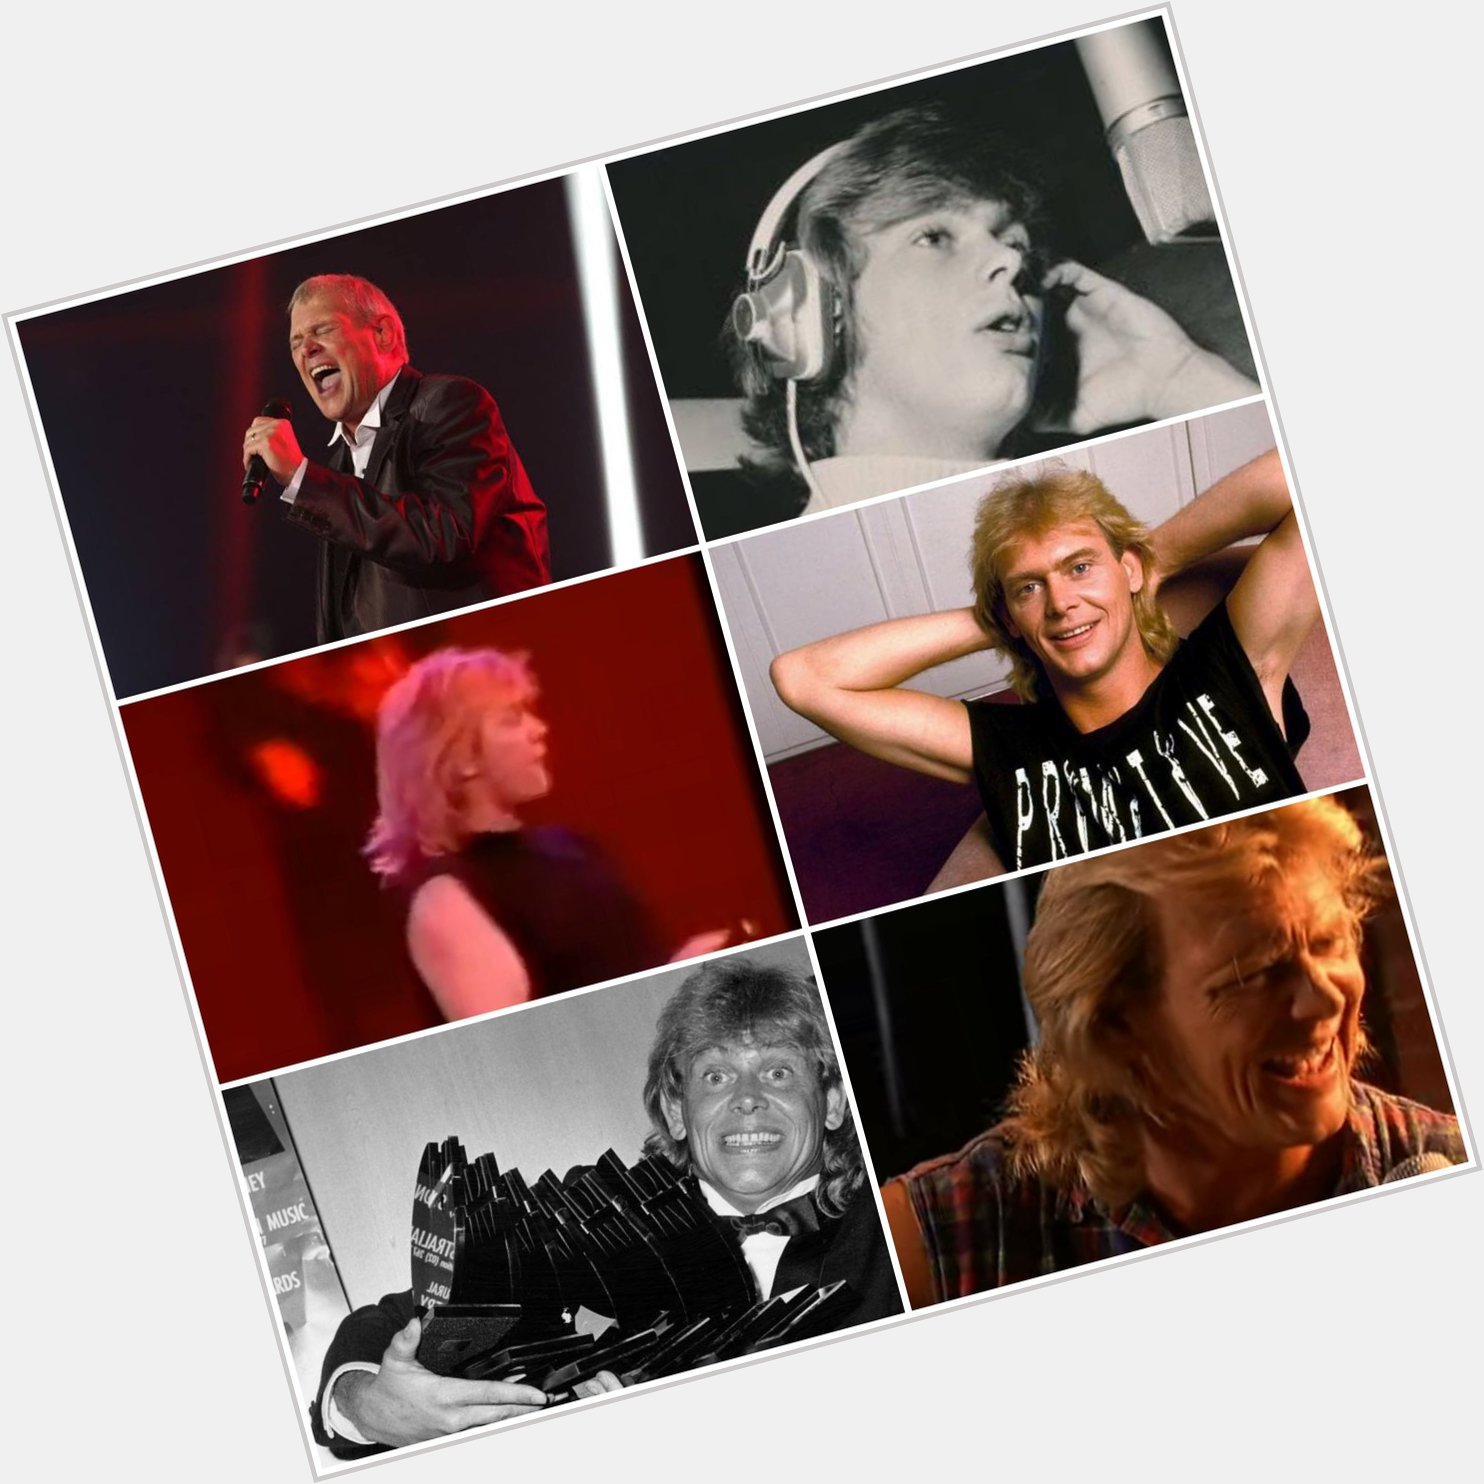 Wishing a very Happy Birthday to my favourite singe John Farnham. Have a great day.  